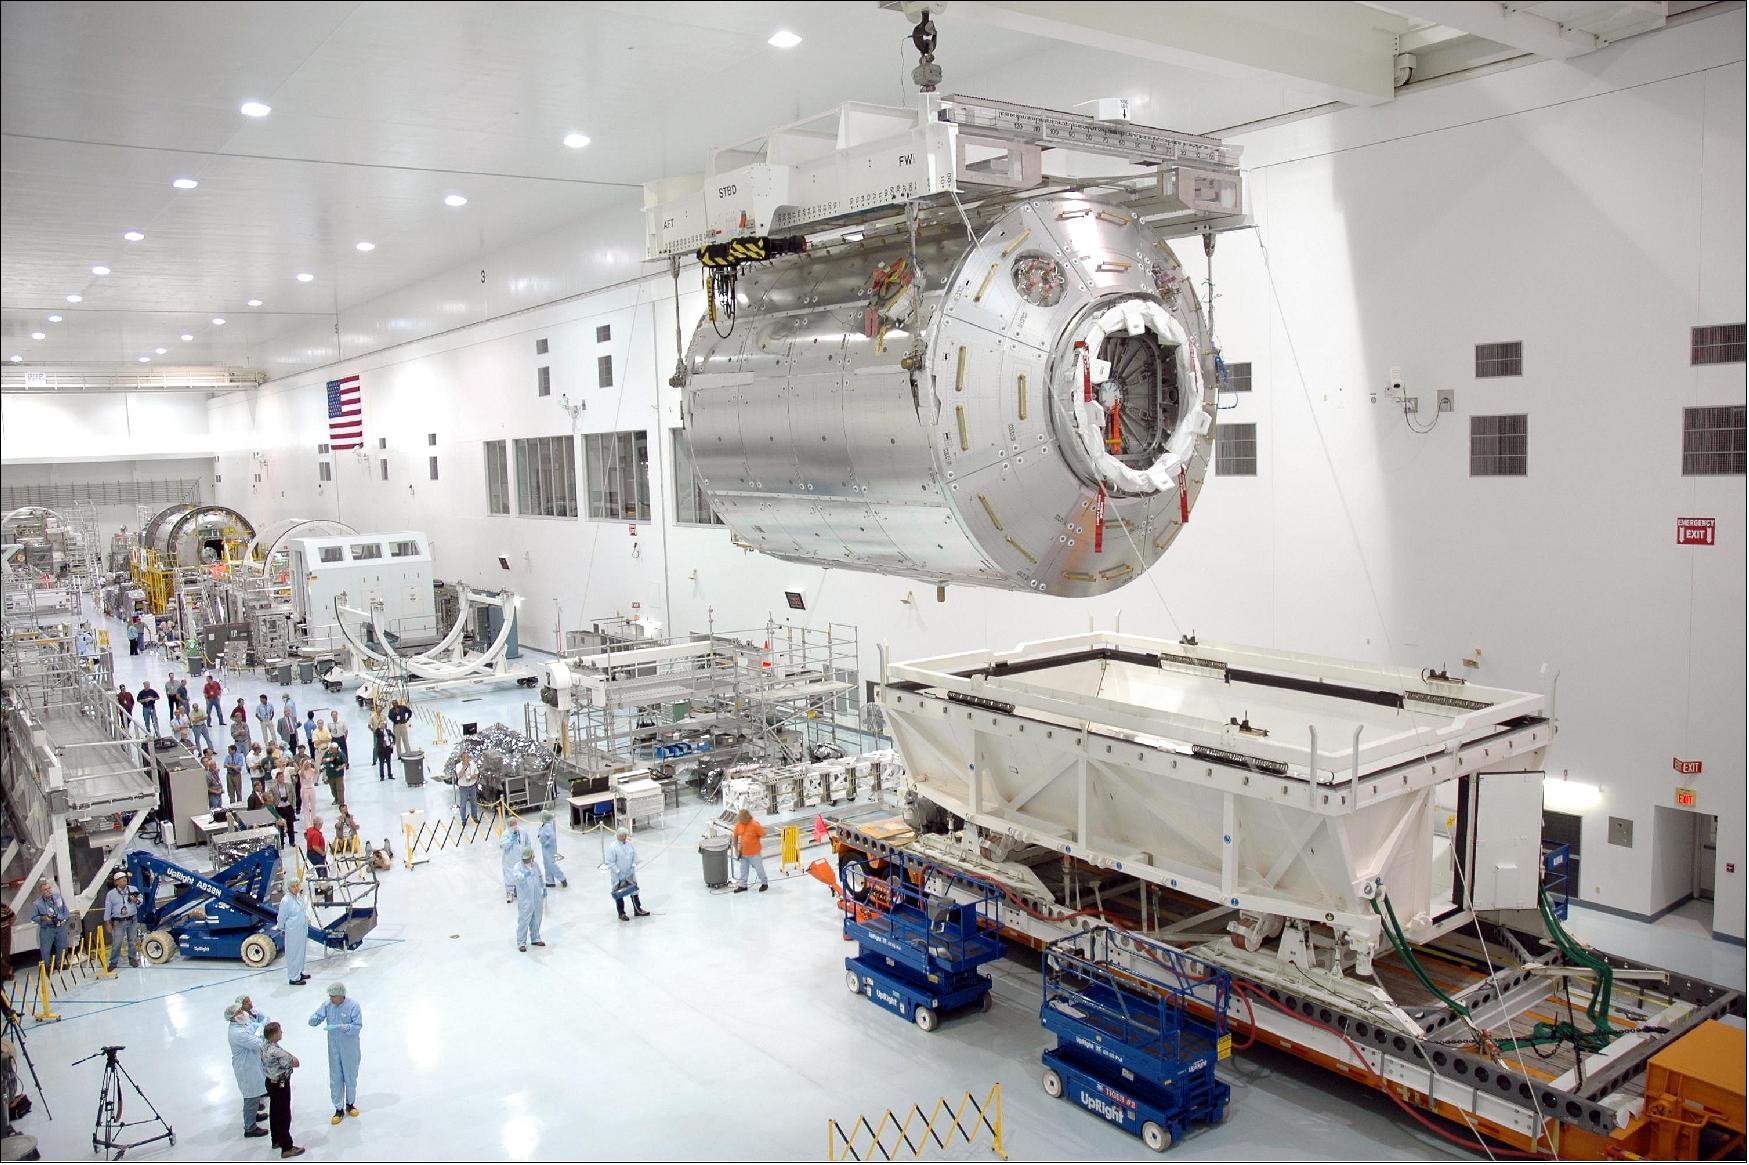 Figure 14: Columbus to scale. The focus of this image is the suspended European Columbus module being moved onto a work stand in a cleanroom at the Kennedy Space Center in Florida, USA. Of course, a cylindrical module of more than 10 t (without payloads) for housing laboratory equipment, storage units and three working astronauts is big, but the contrast between Columbus and the people in the image is startling. Even more so when we remember that Columbus is one of 16 similarly sized modules orbiting 400 km over our heads (image credit: NASA)